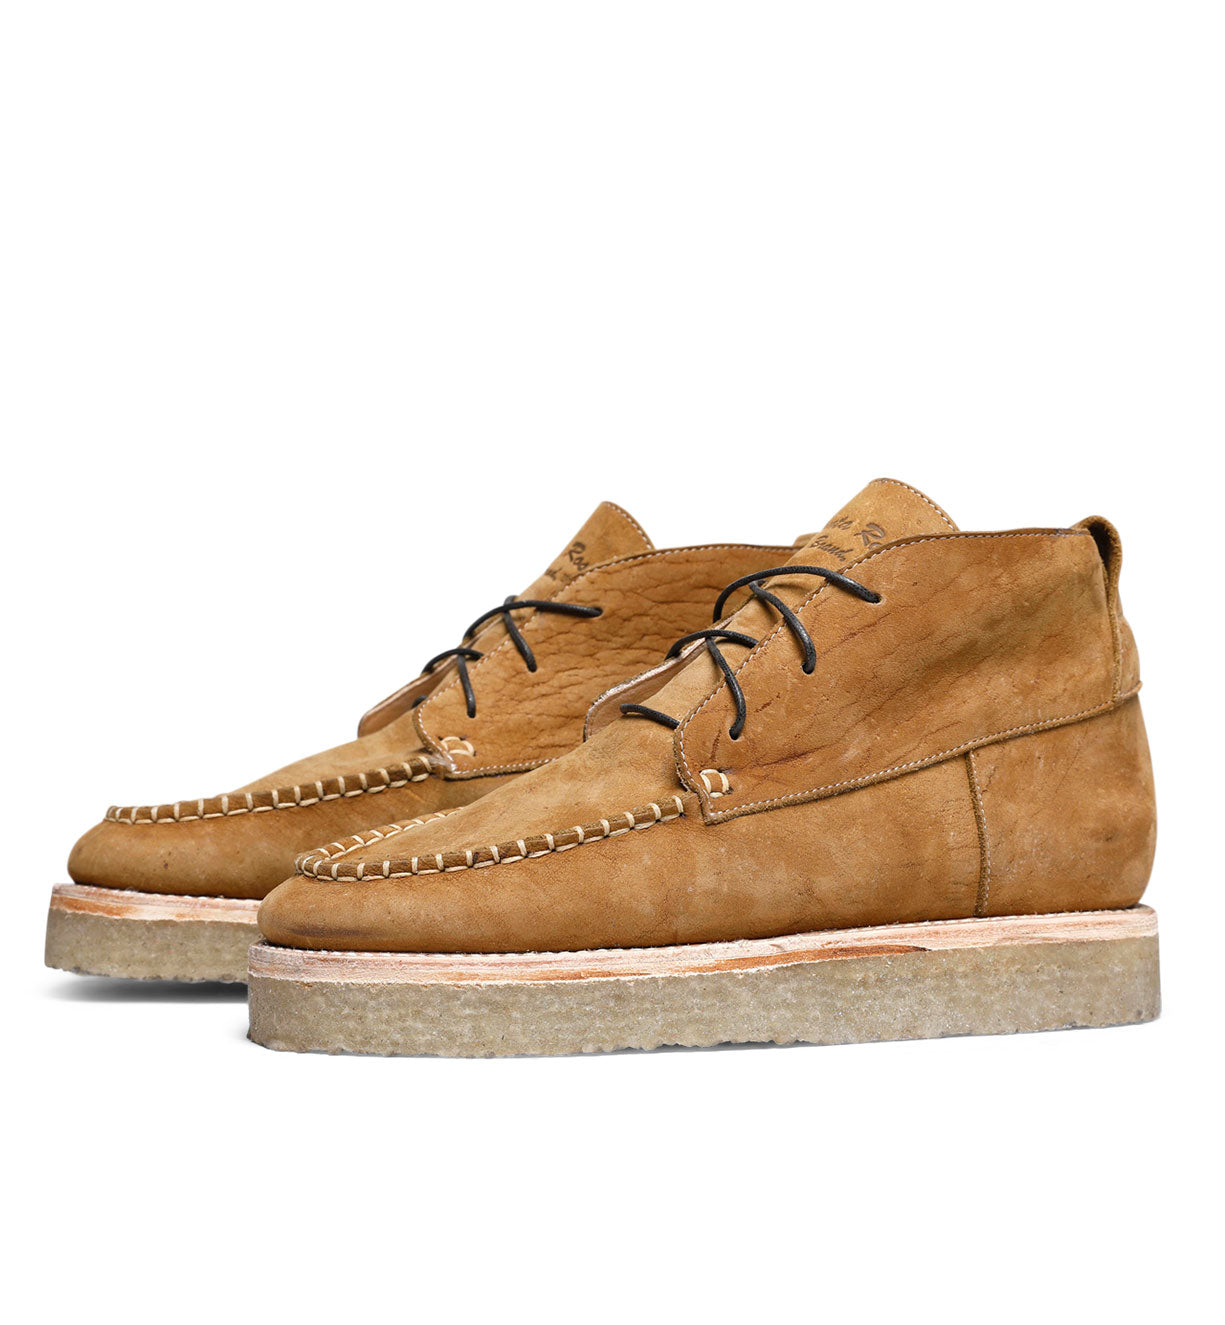 A comfortable, tan suede Tahoma Moccasin shoe with a lace out from the Santa Rosa Brand.